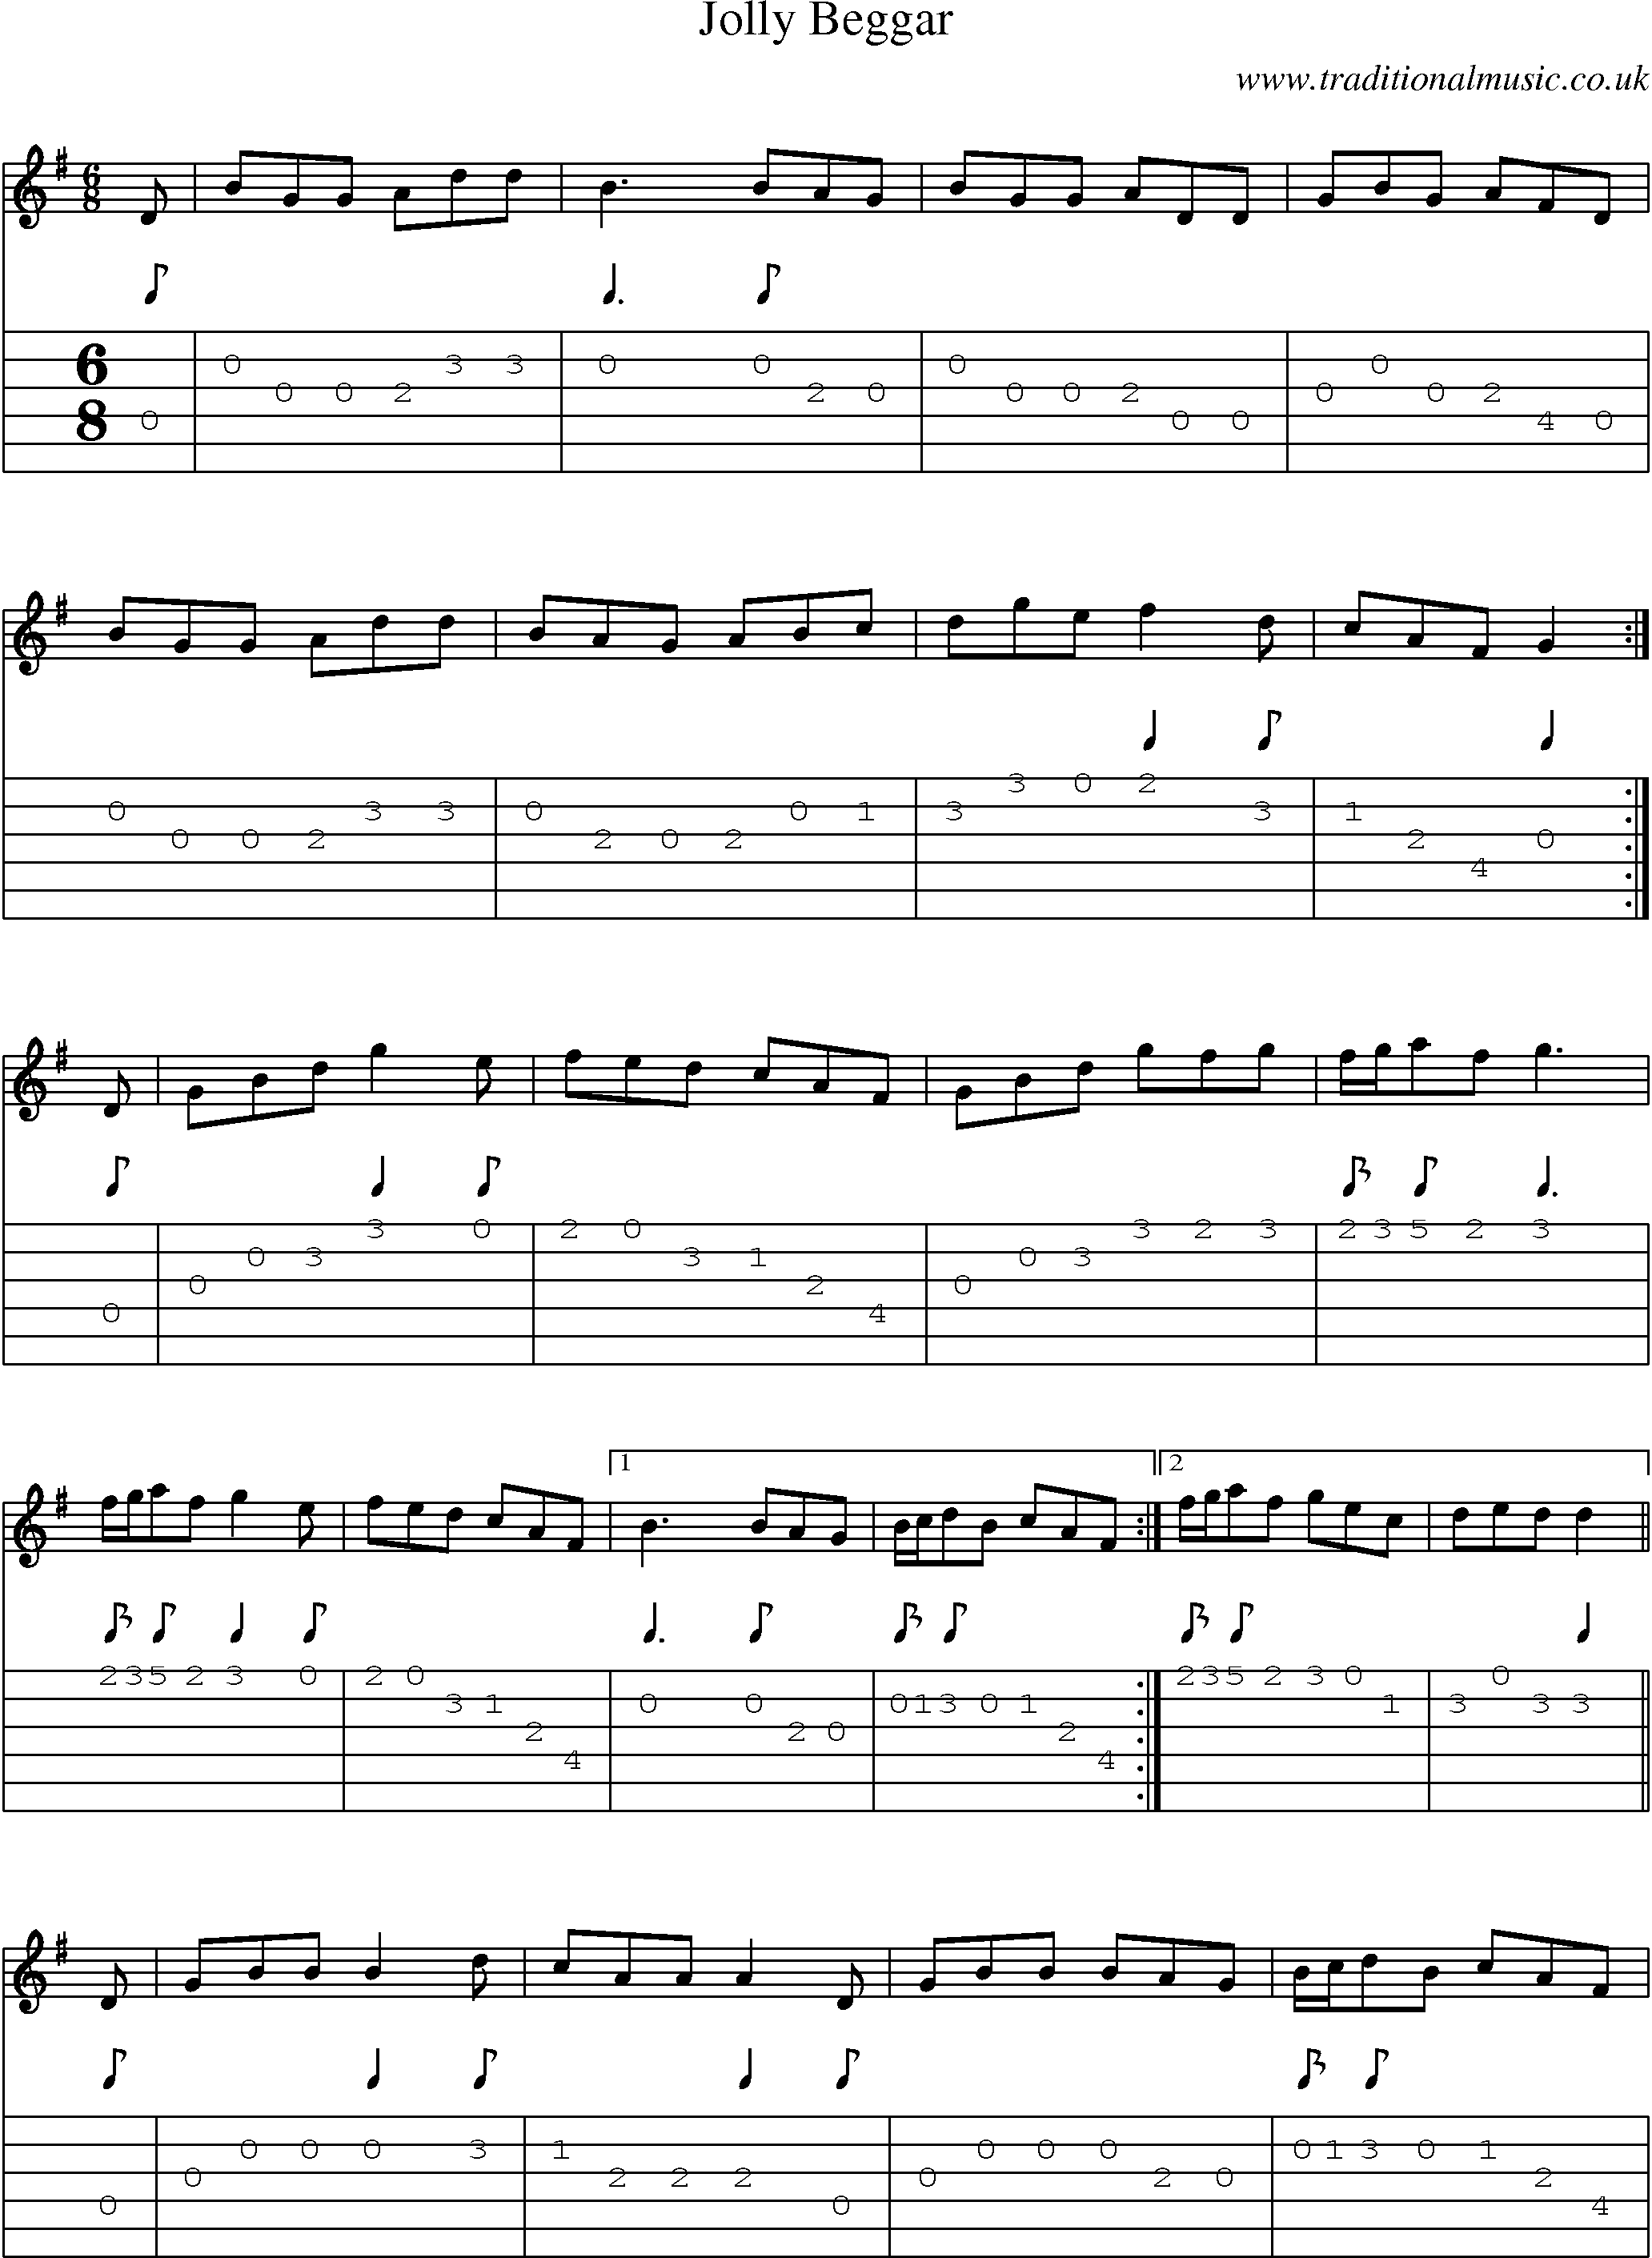 Music Score and Guitar Tabs for Jolly Beggar